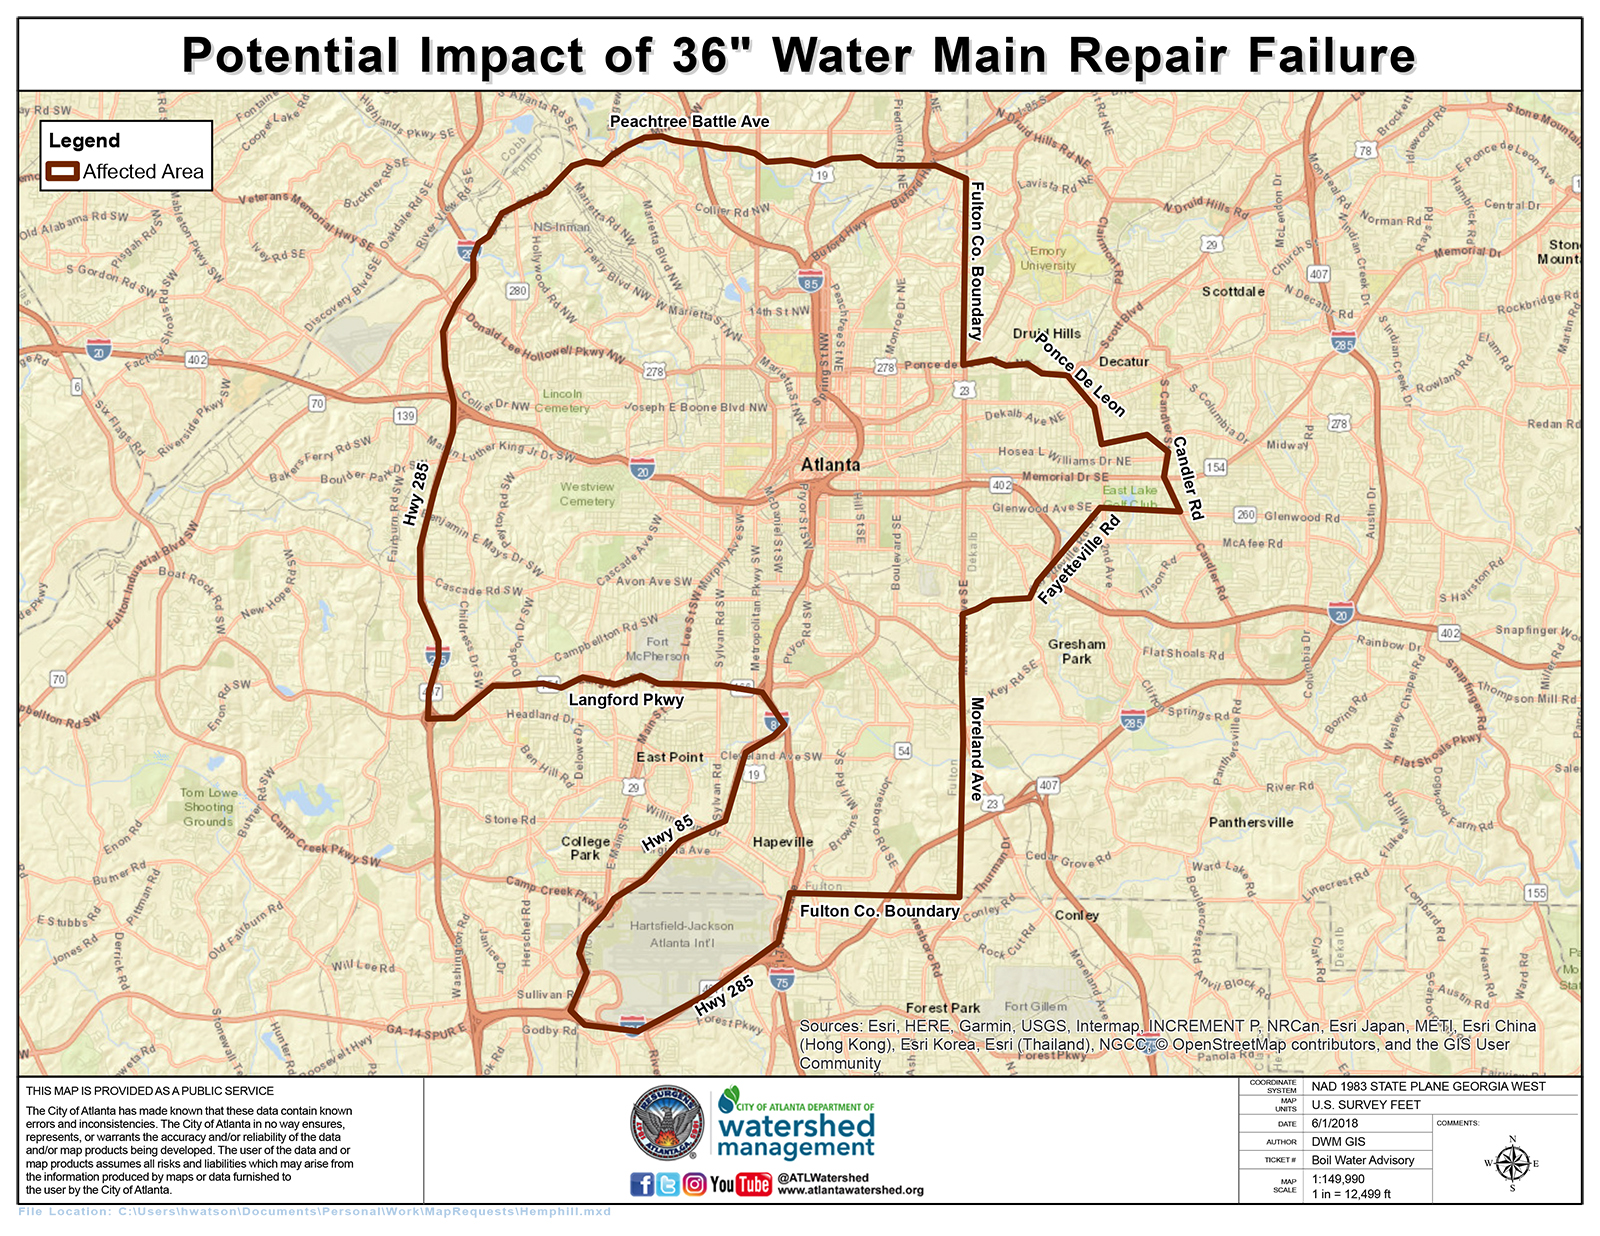 Campus Prepares for Possible Water Service Impacts | News Center